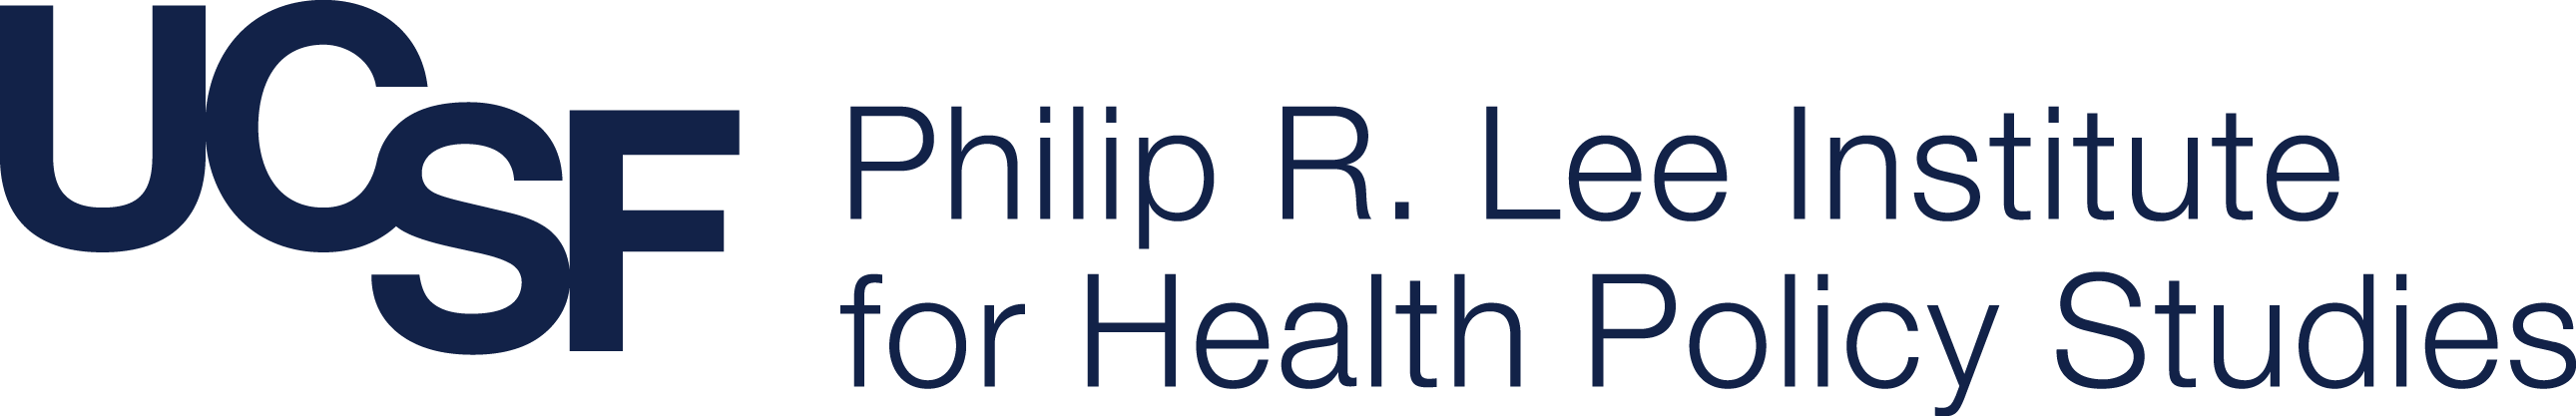 UCSF Philip R. Lee Institute for Health Policy Studies